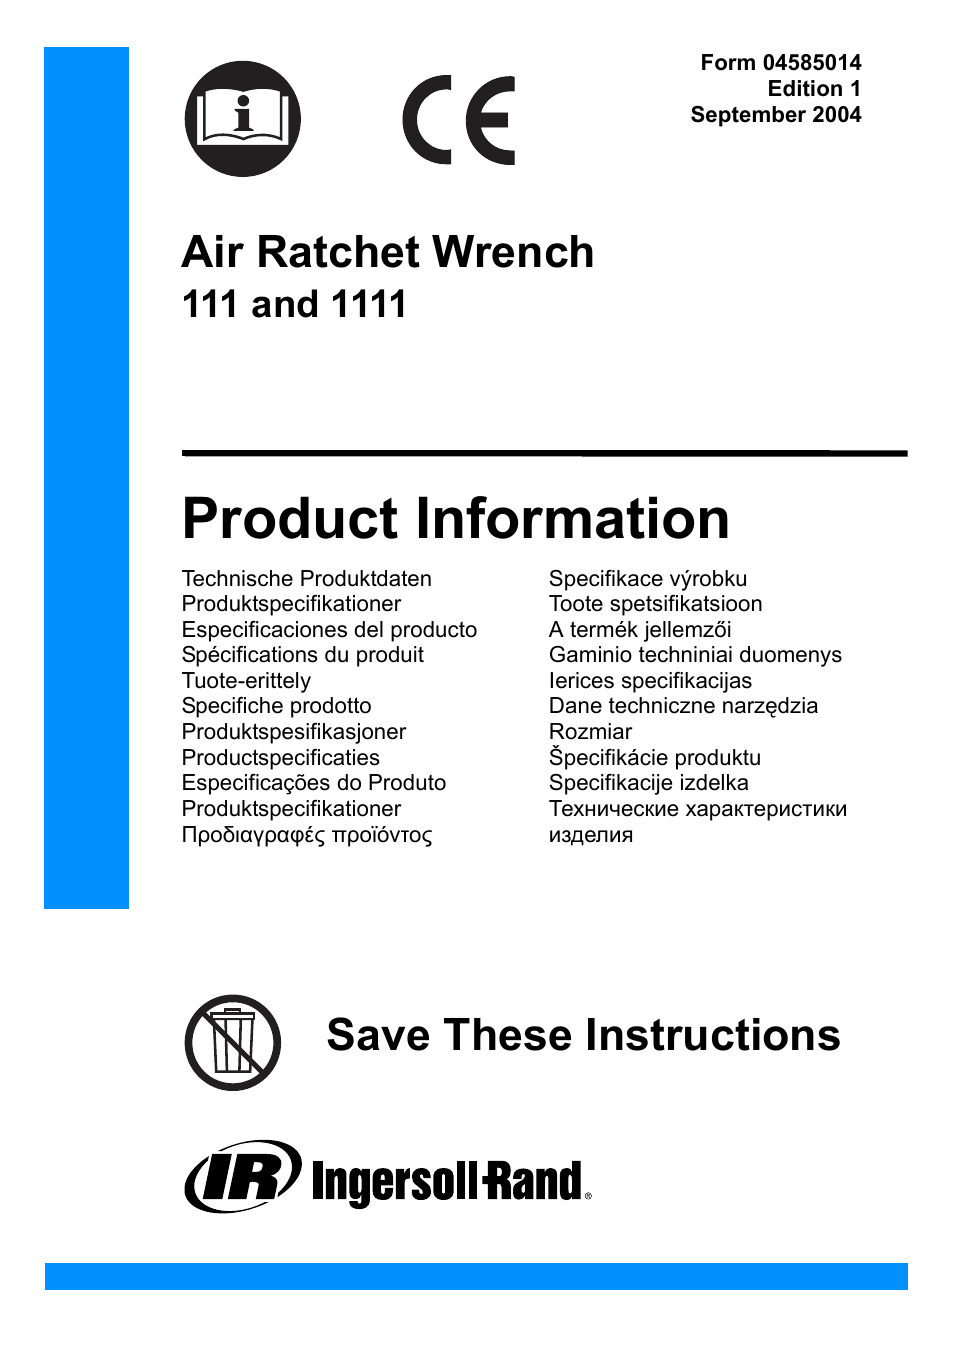 Ingersoll-Rand AIR RATCHET WRENCH 111 User Manual | 28 pages